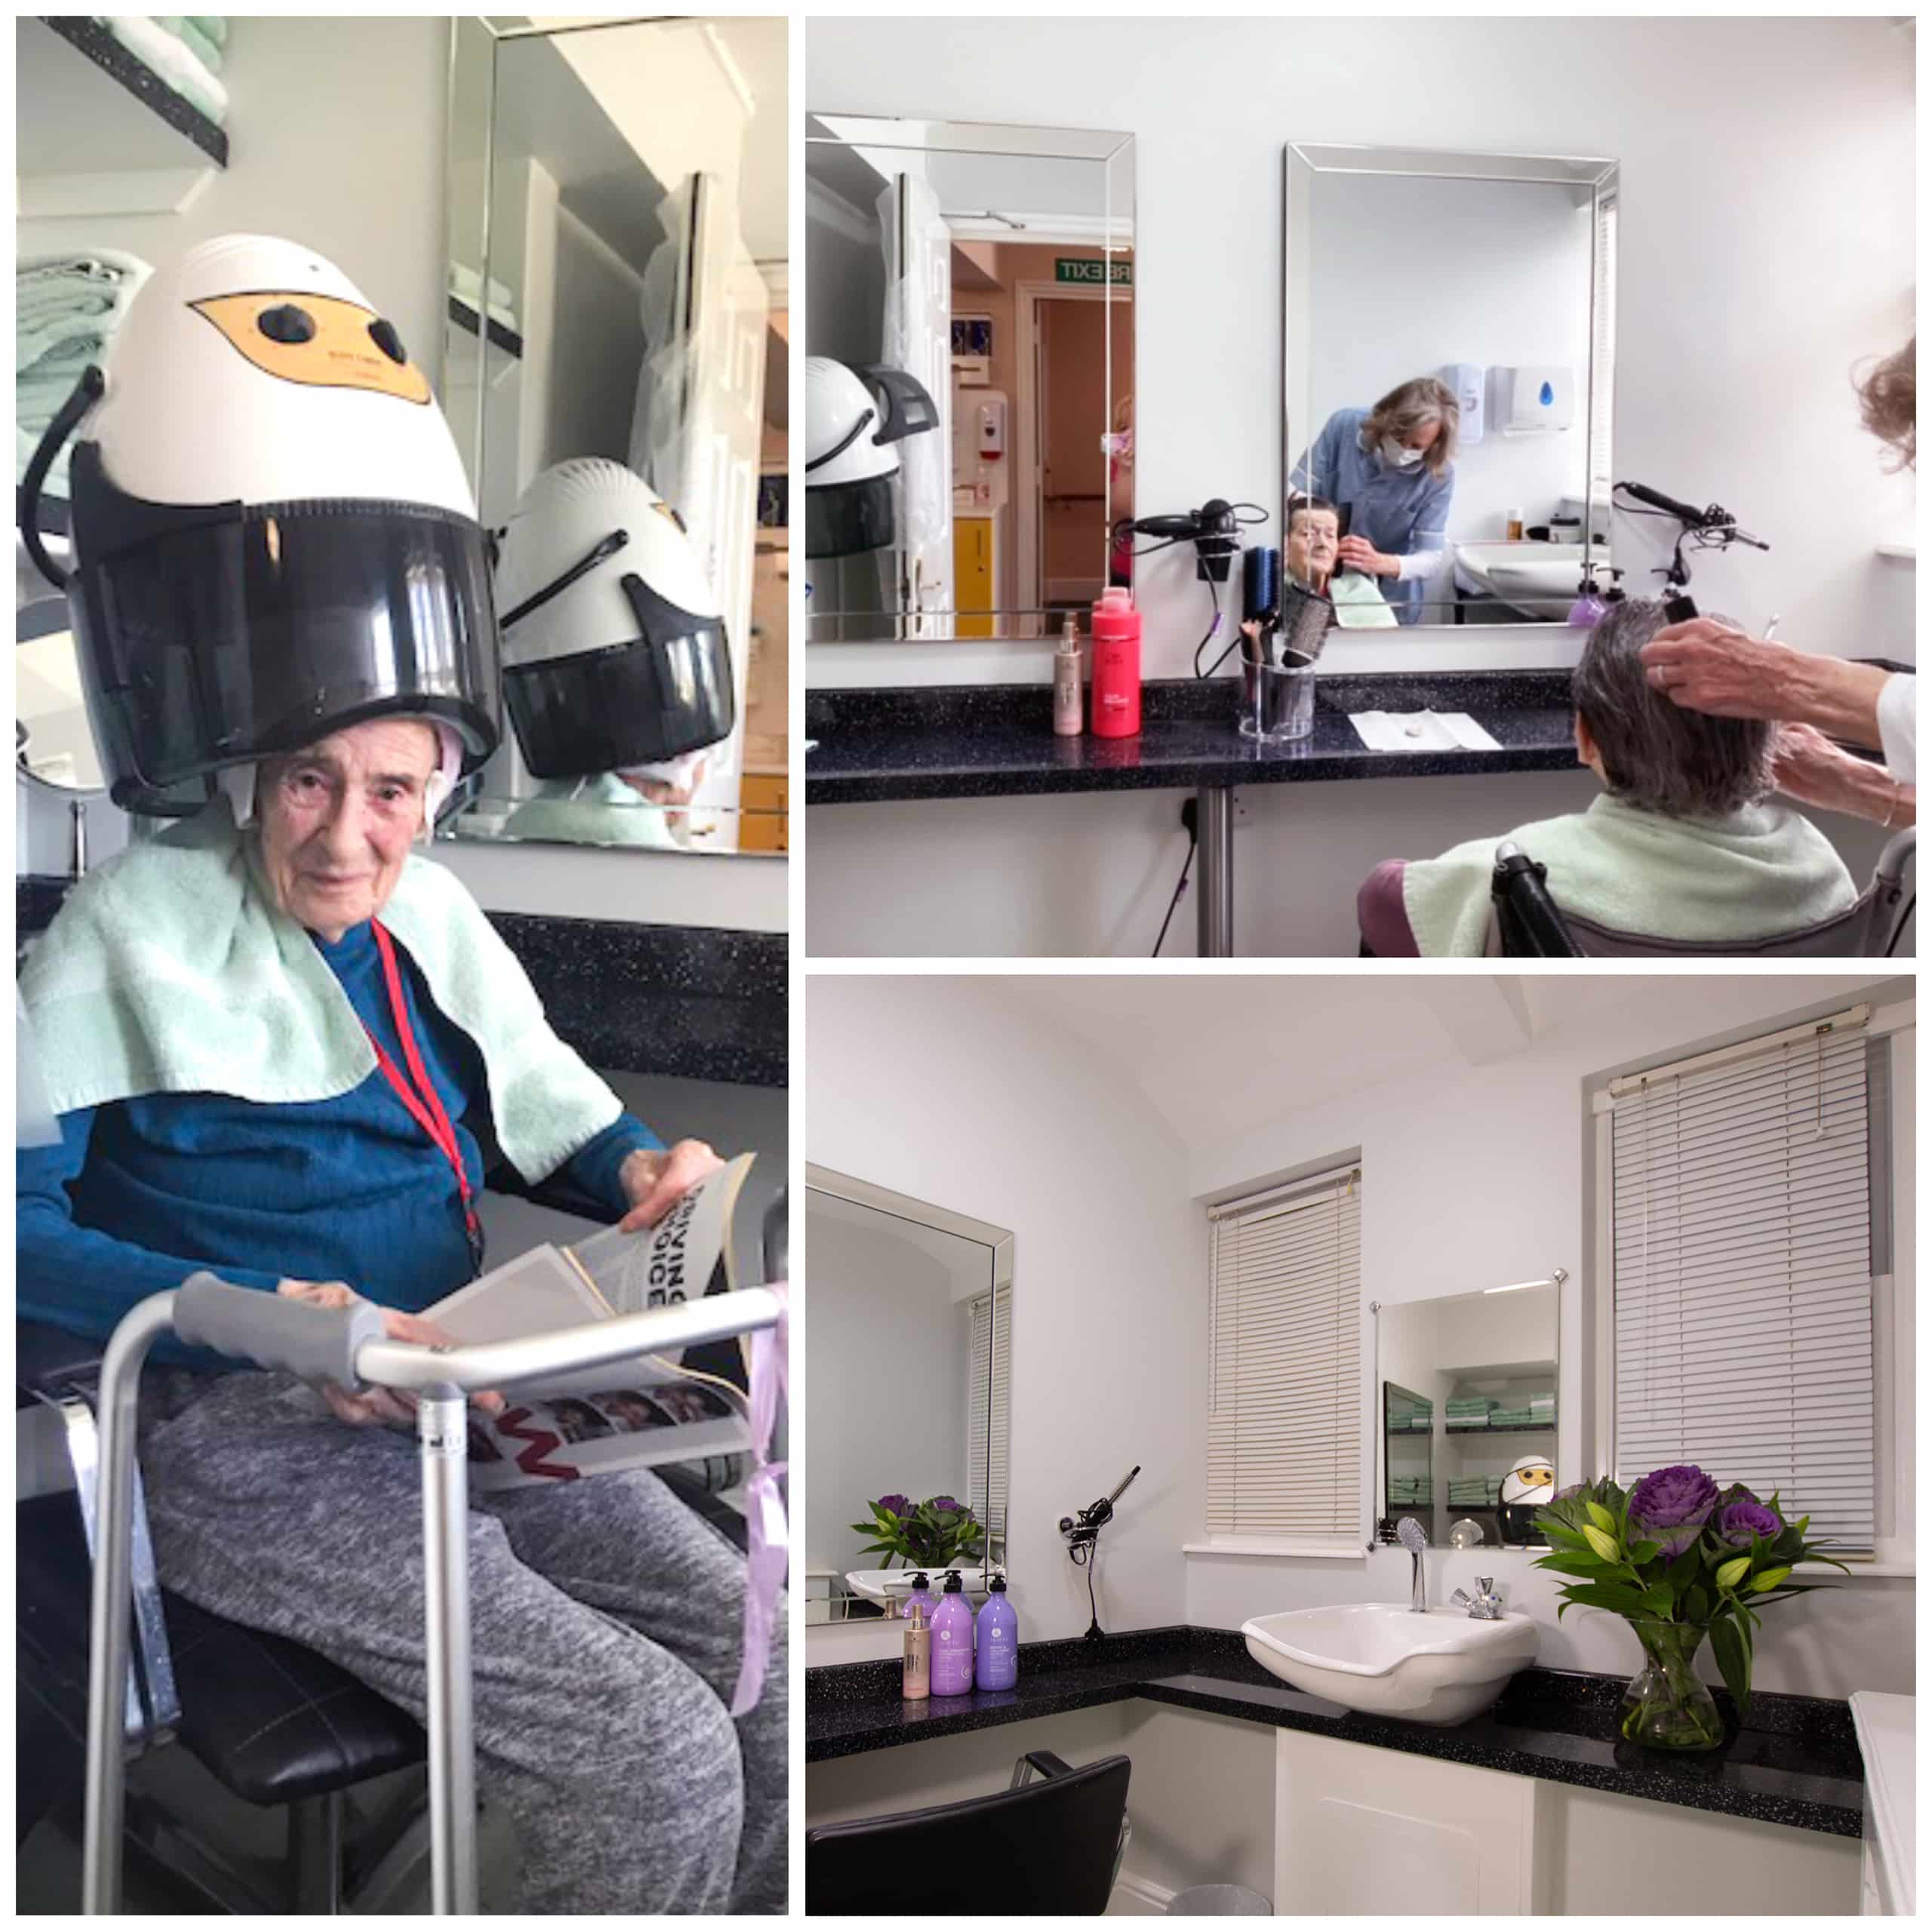 Deddington care home residents enjoy a cut and blow dry from their hairdresser in Featherton House's new-look salon.